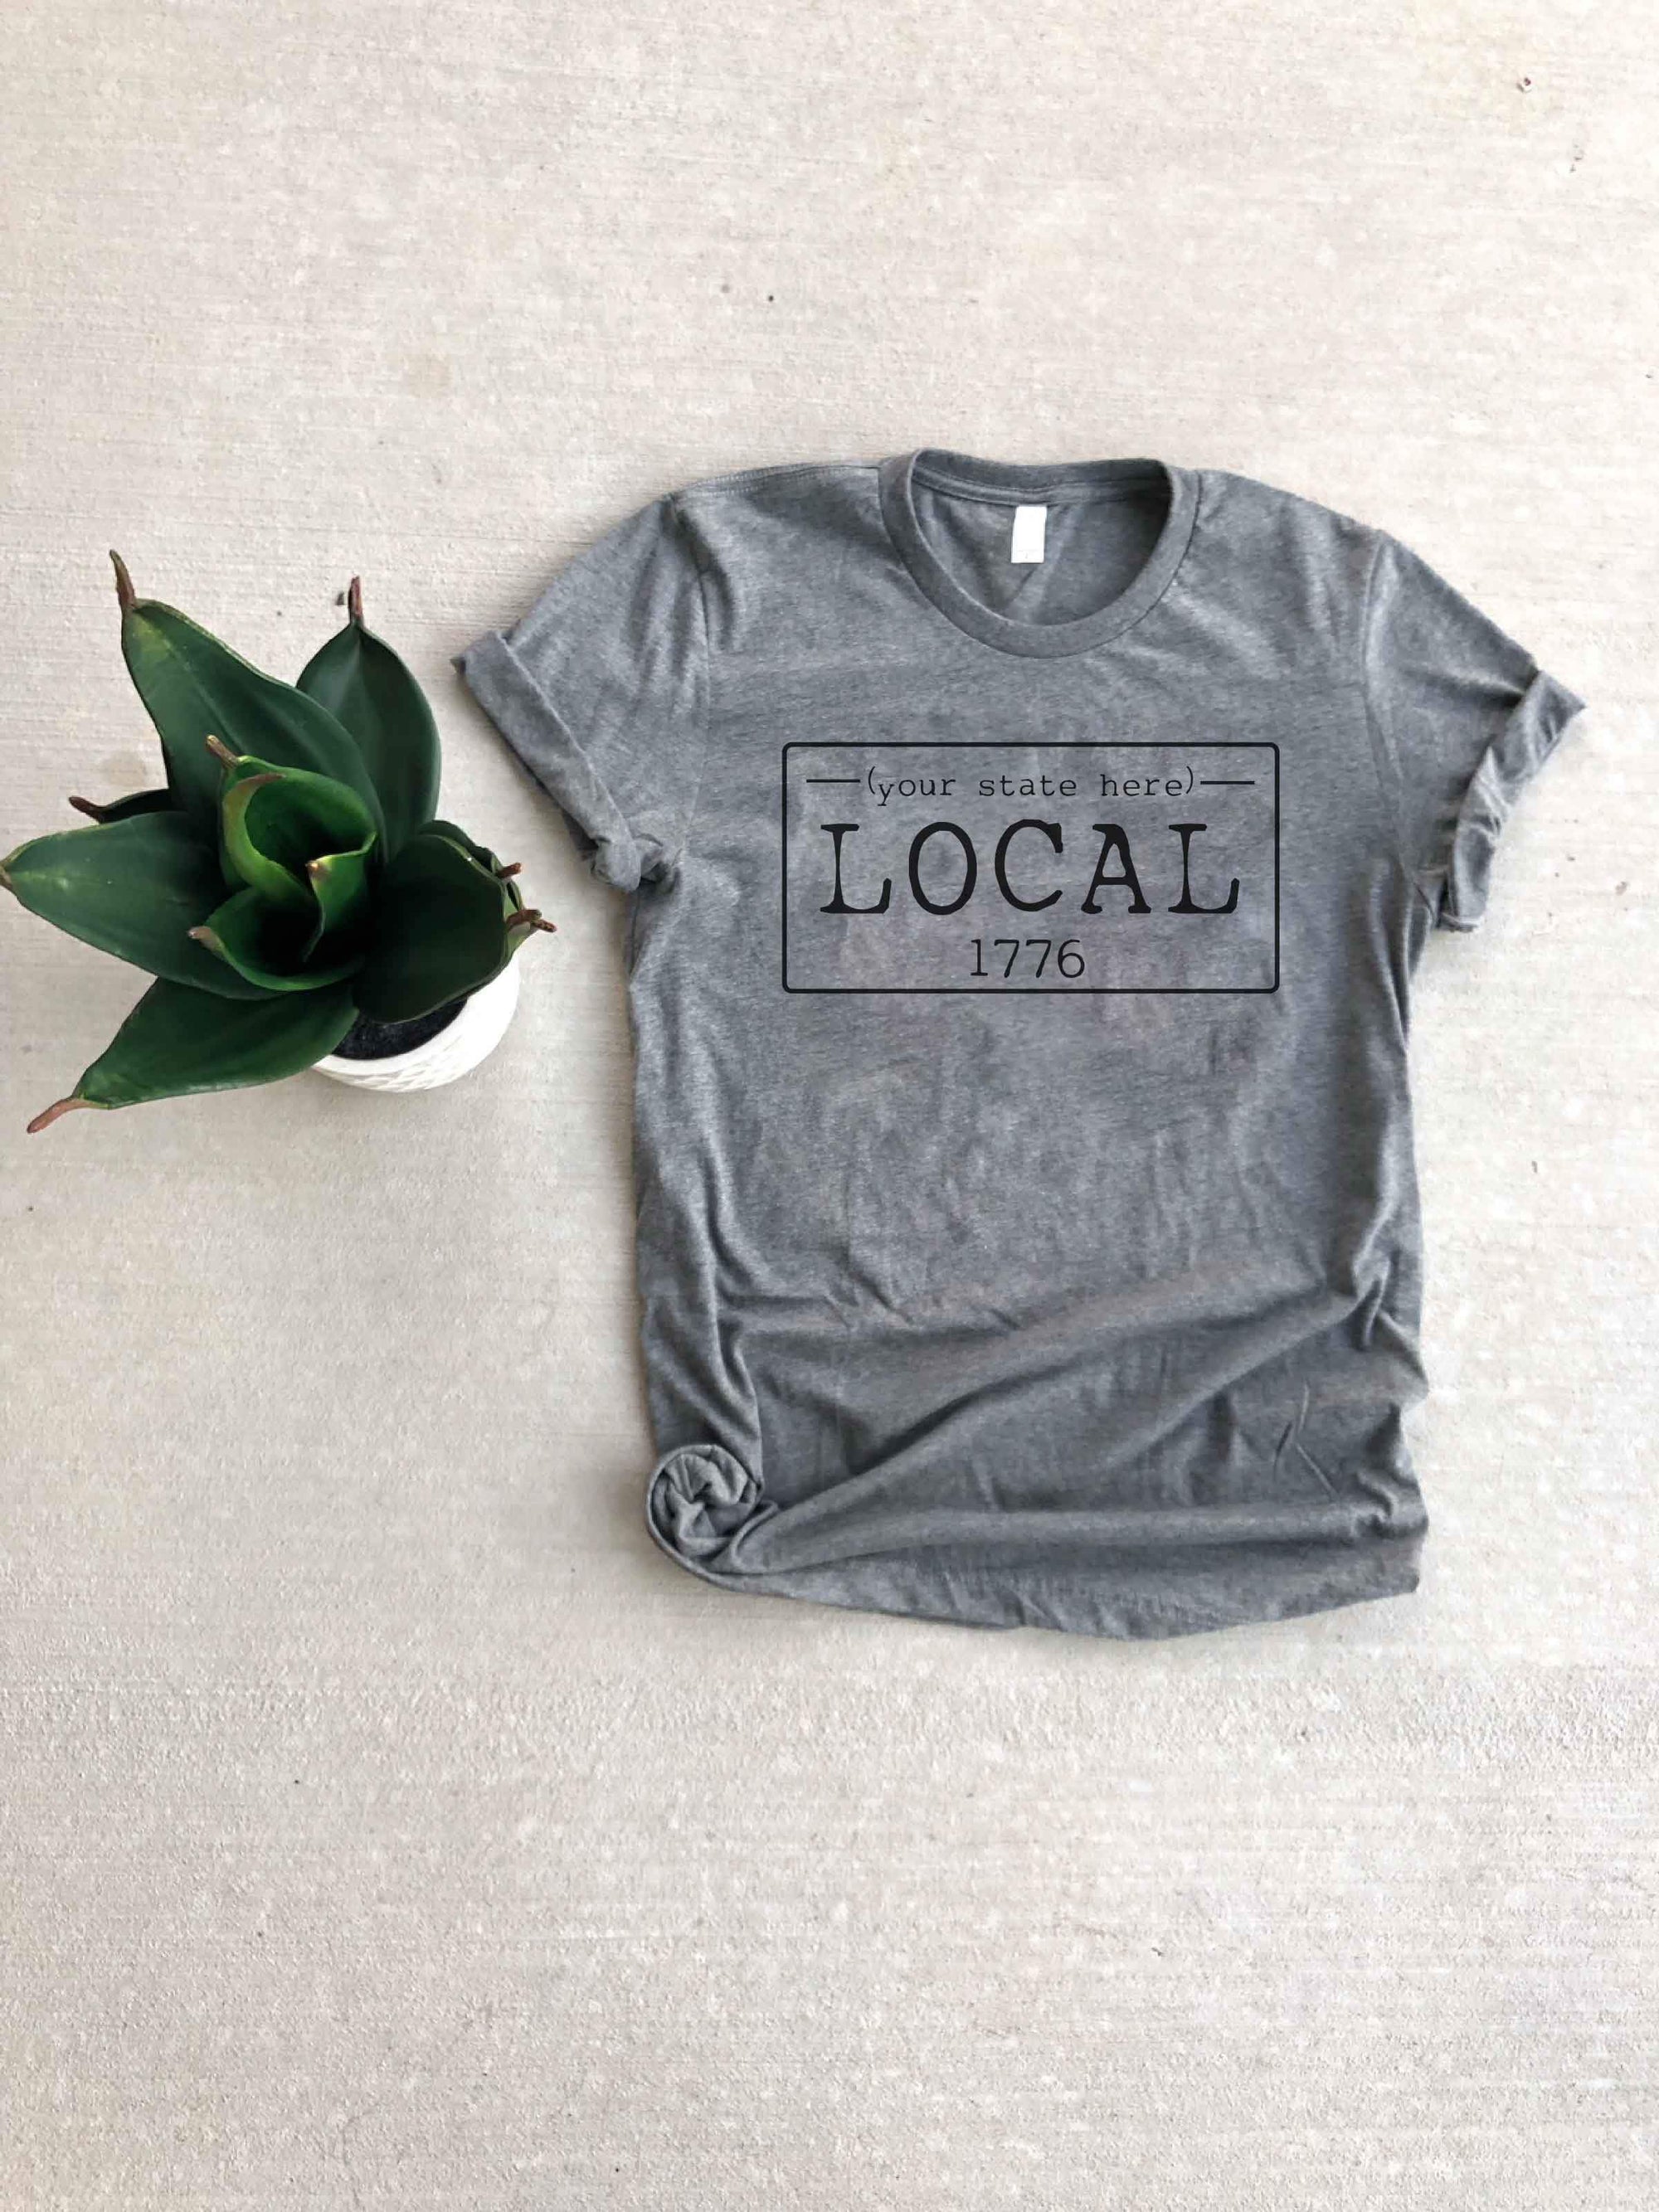 Local license plate state tee- I-M Short sleeve state tee Bella Canvas 3001 natural and deep heather XS Cream Iowa